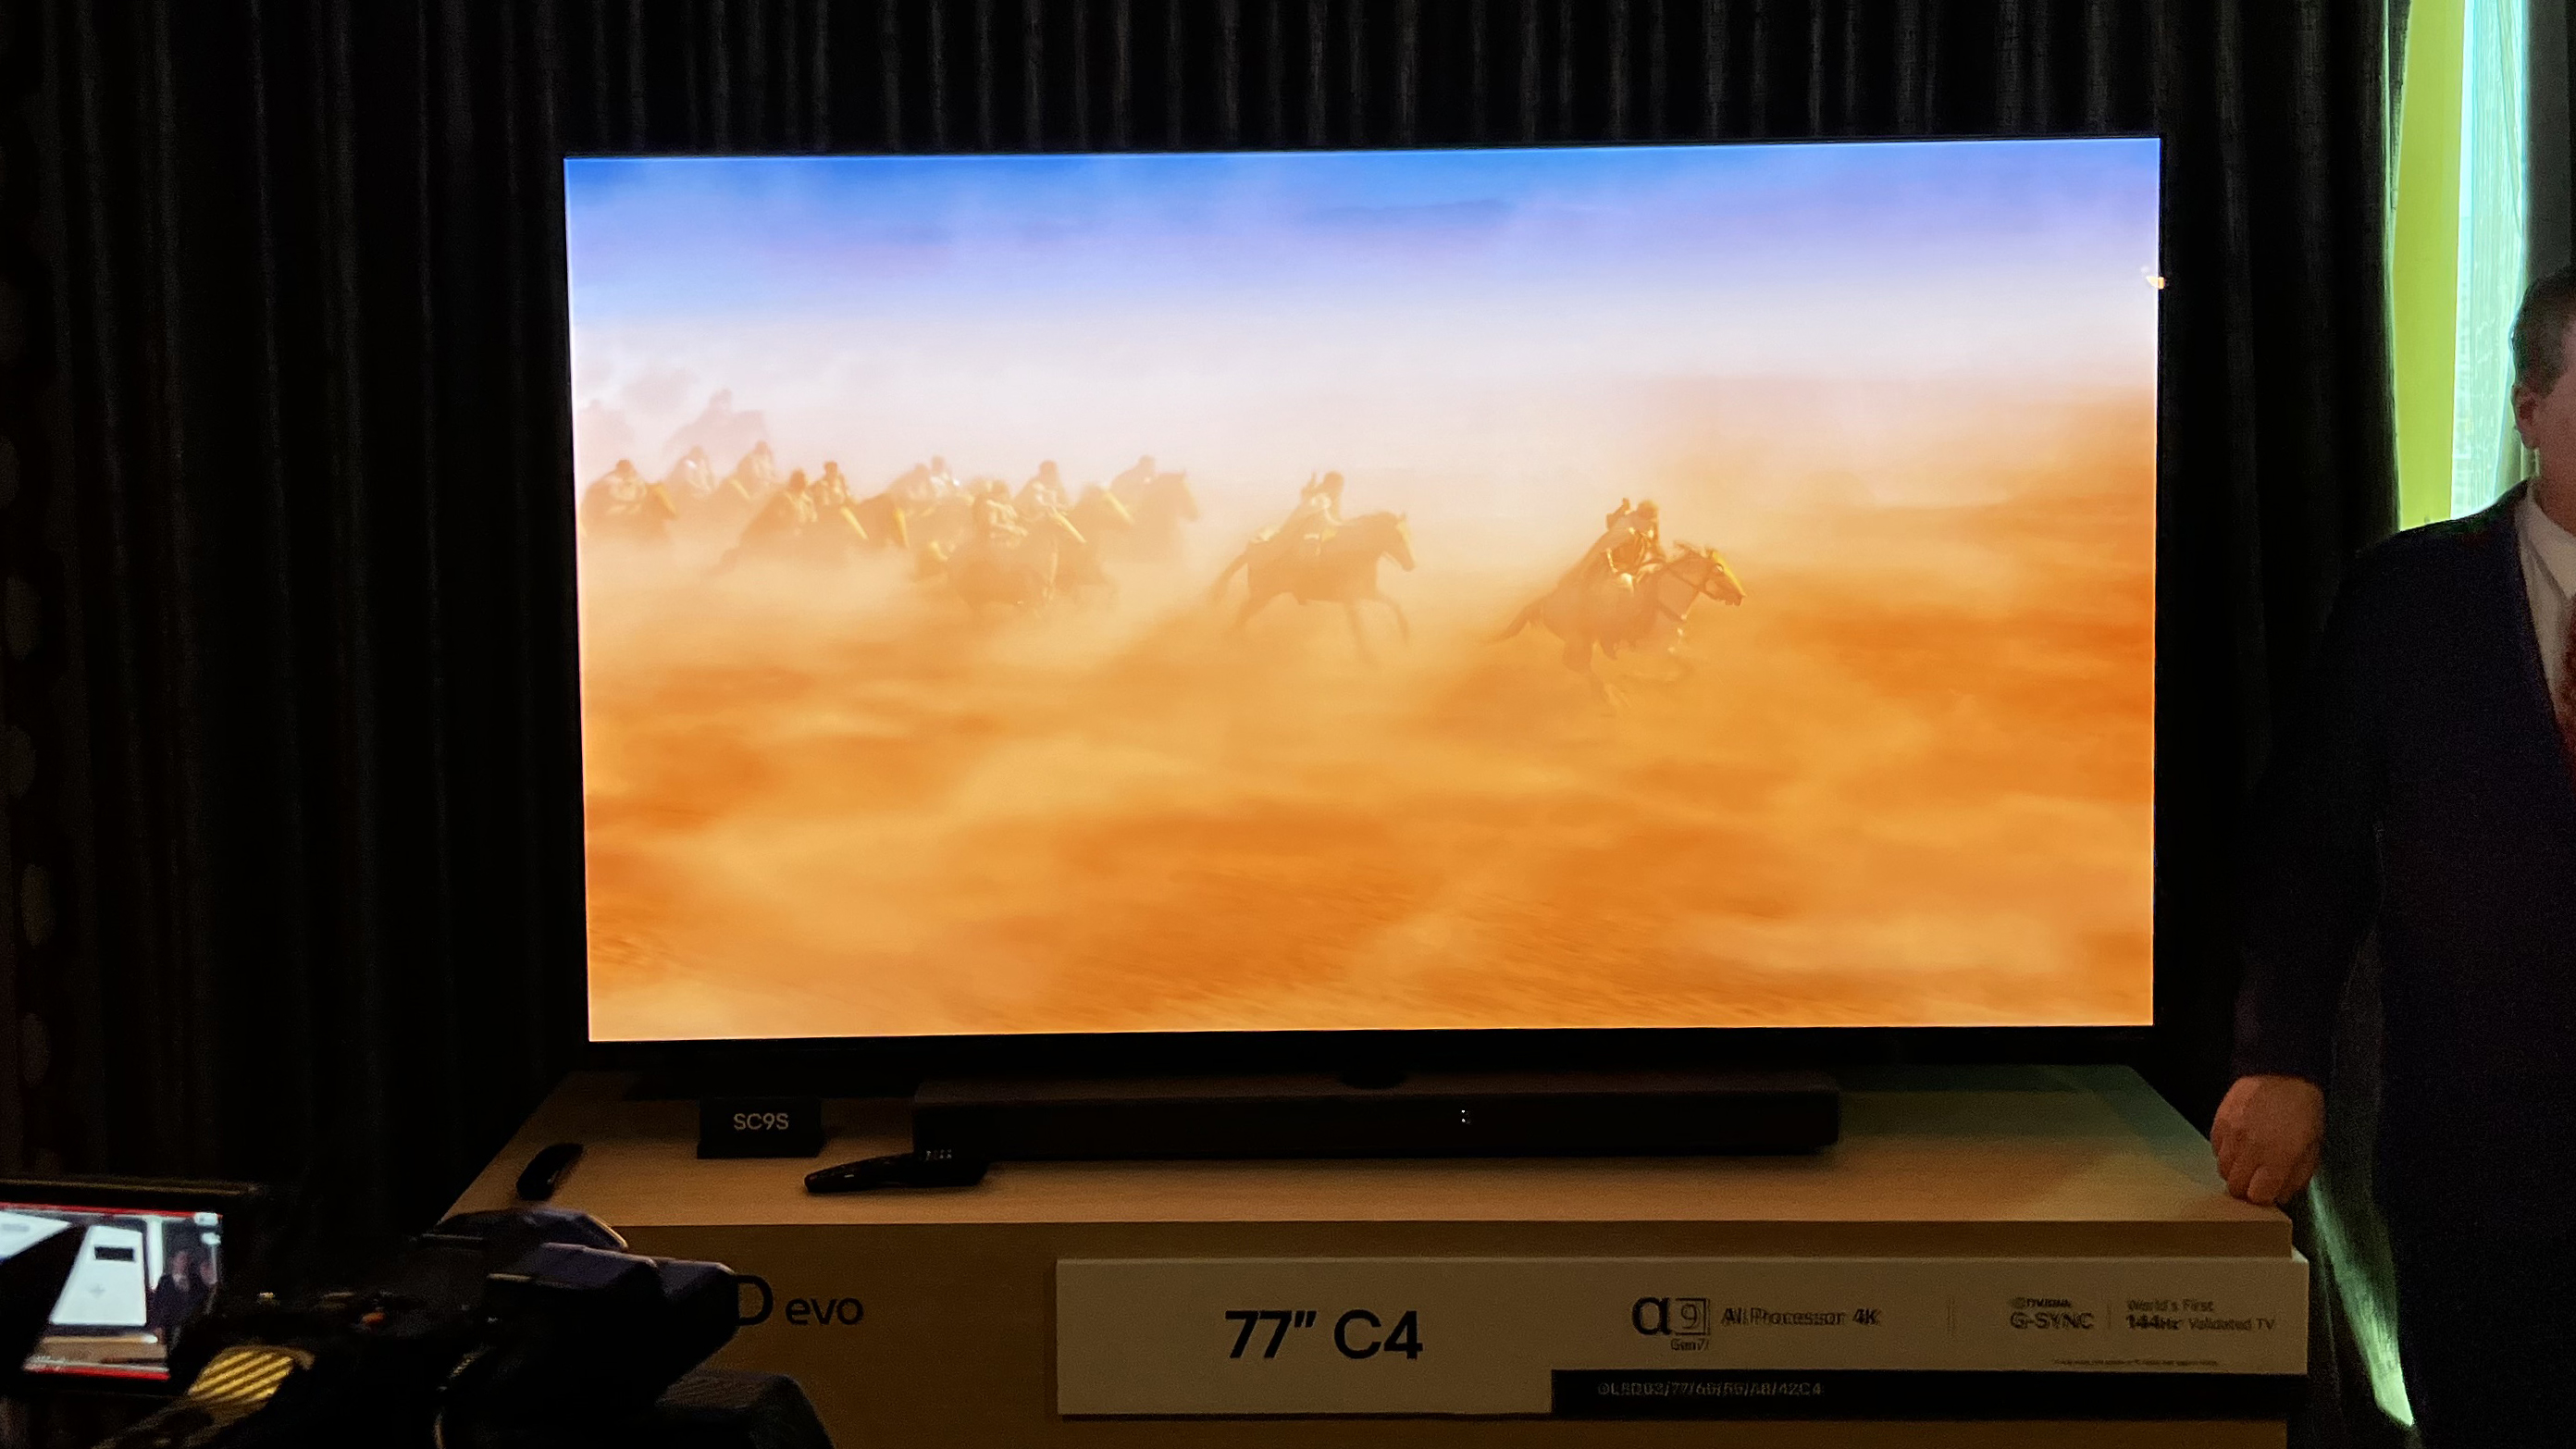 LG C4 TV in a hotel room, movie demonstration